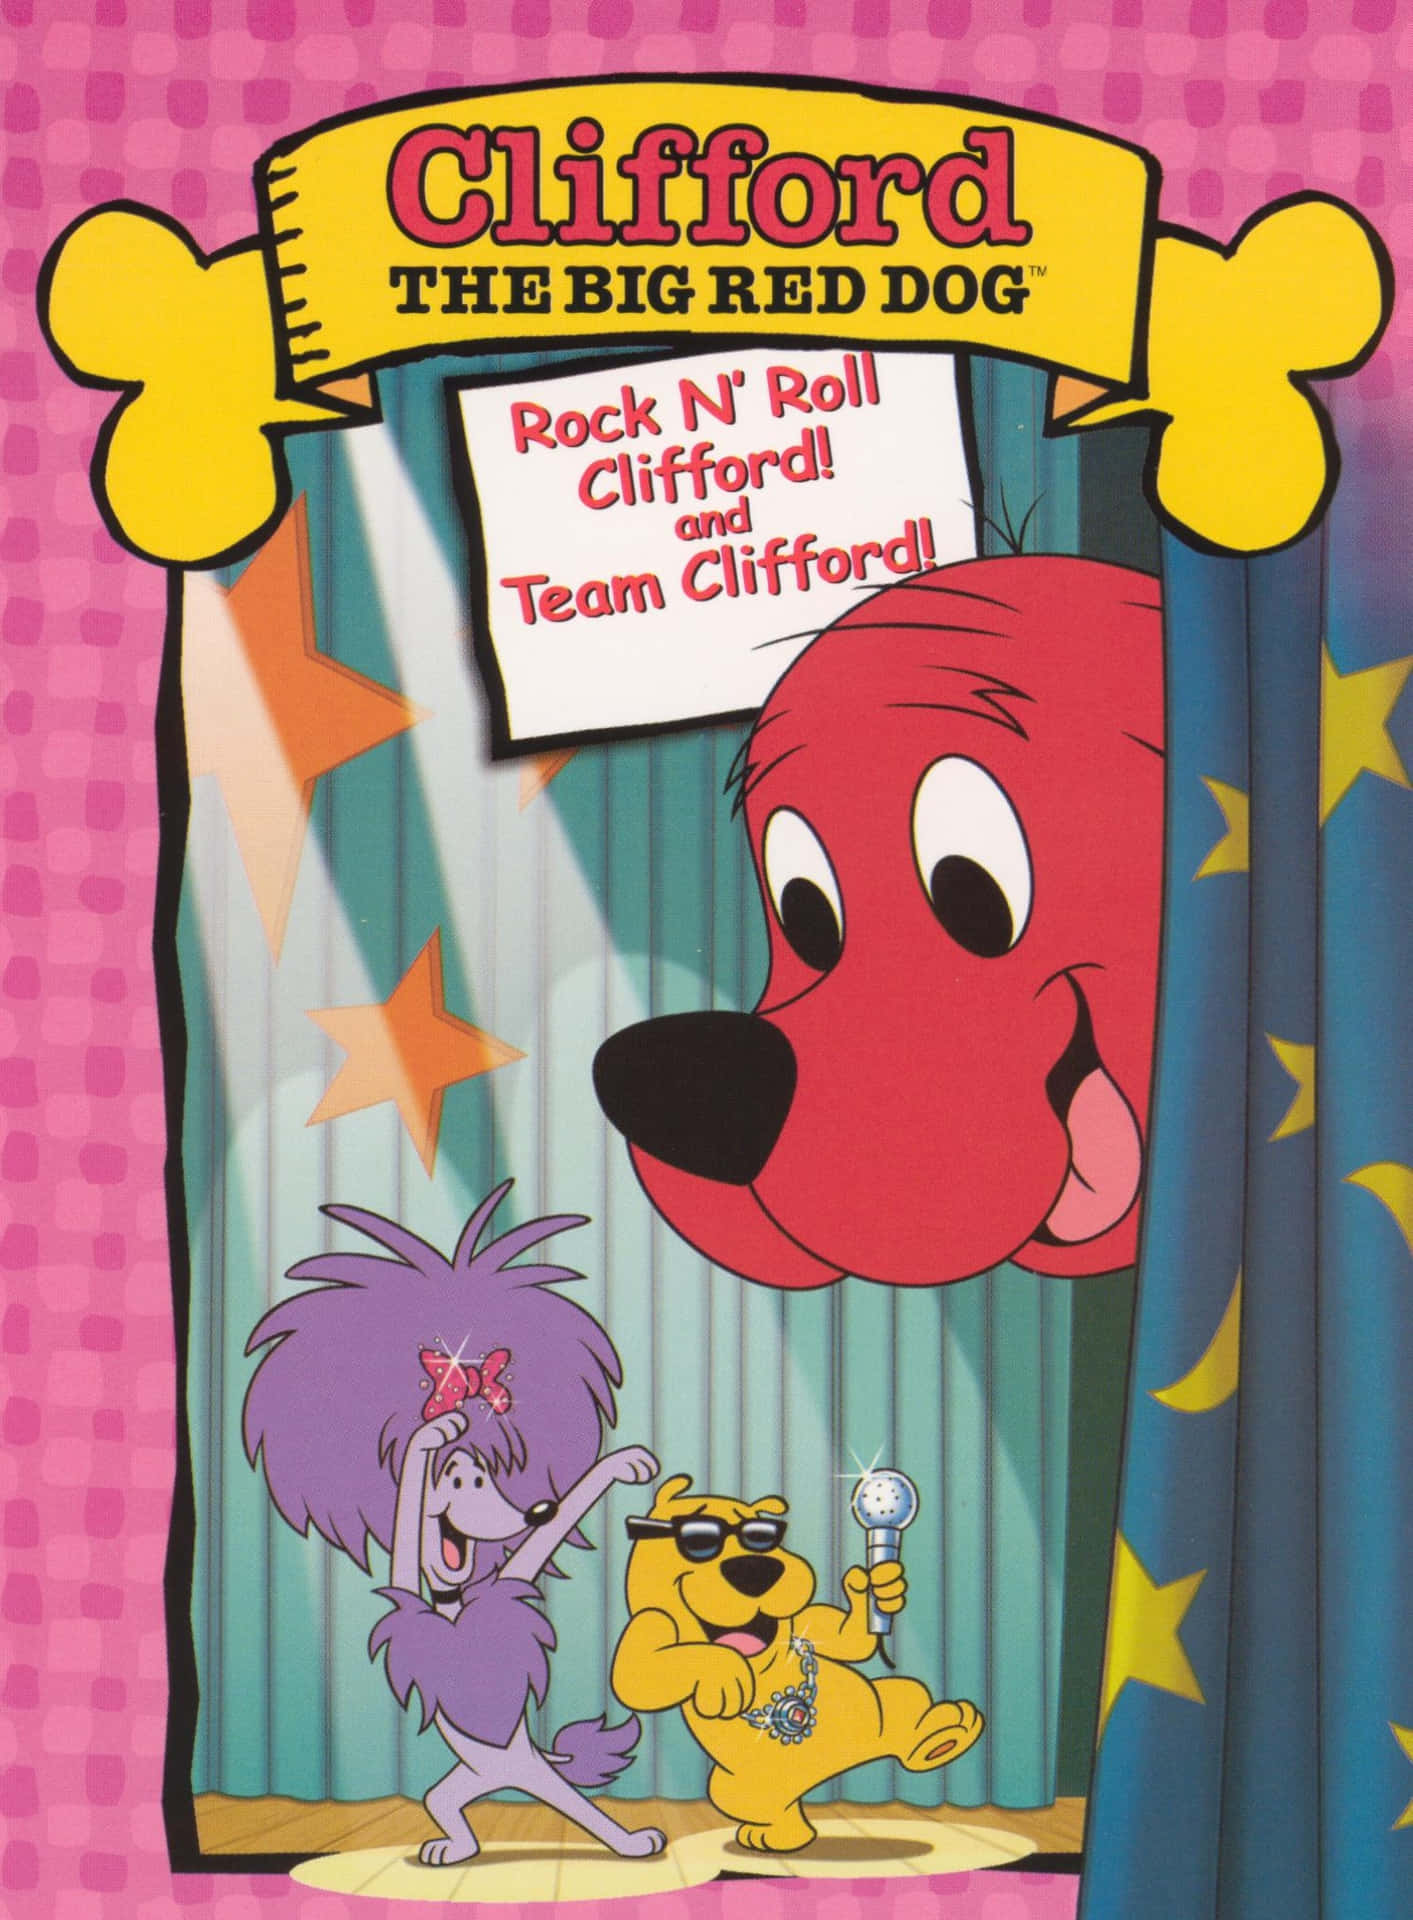 Clifford The Big Red Dog Leads the Way